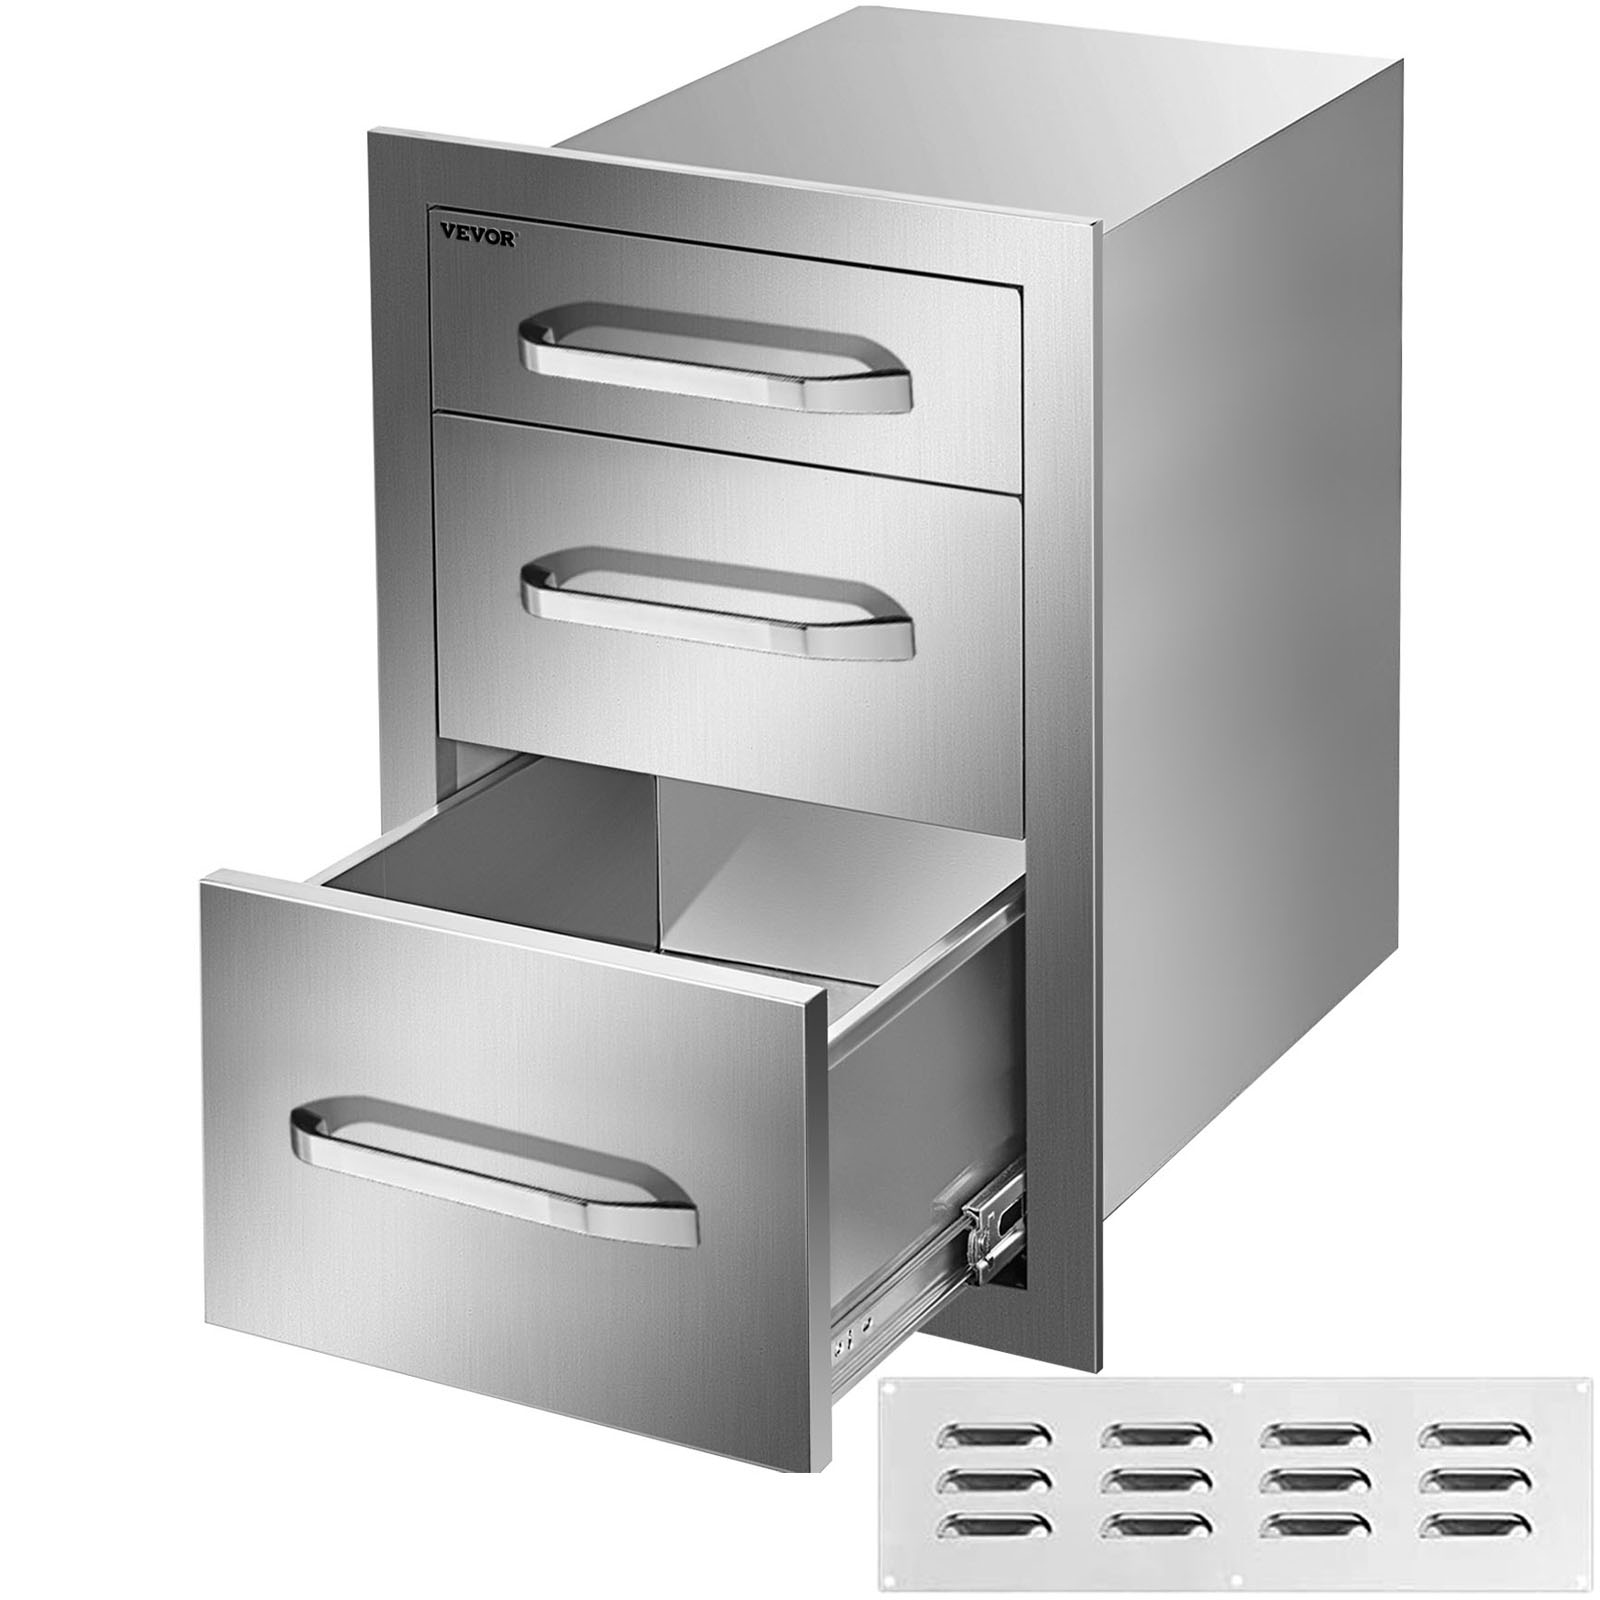 Triple Drawer Outdoor Kitchen Bbq Island Stainless Steel 17.7"w X 20.5"h от Vevor Many GEOs